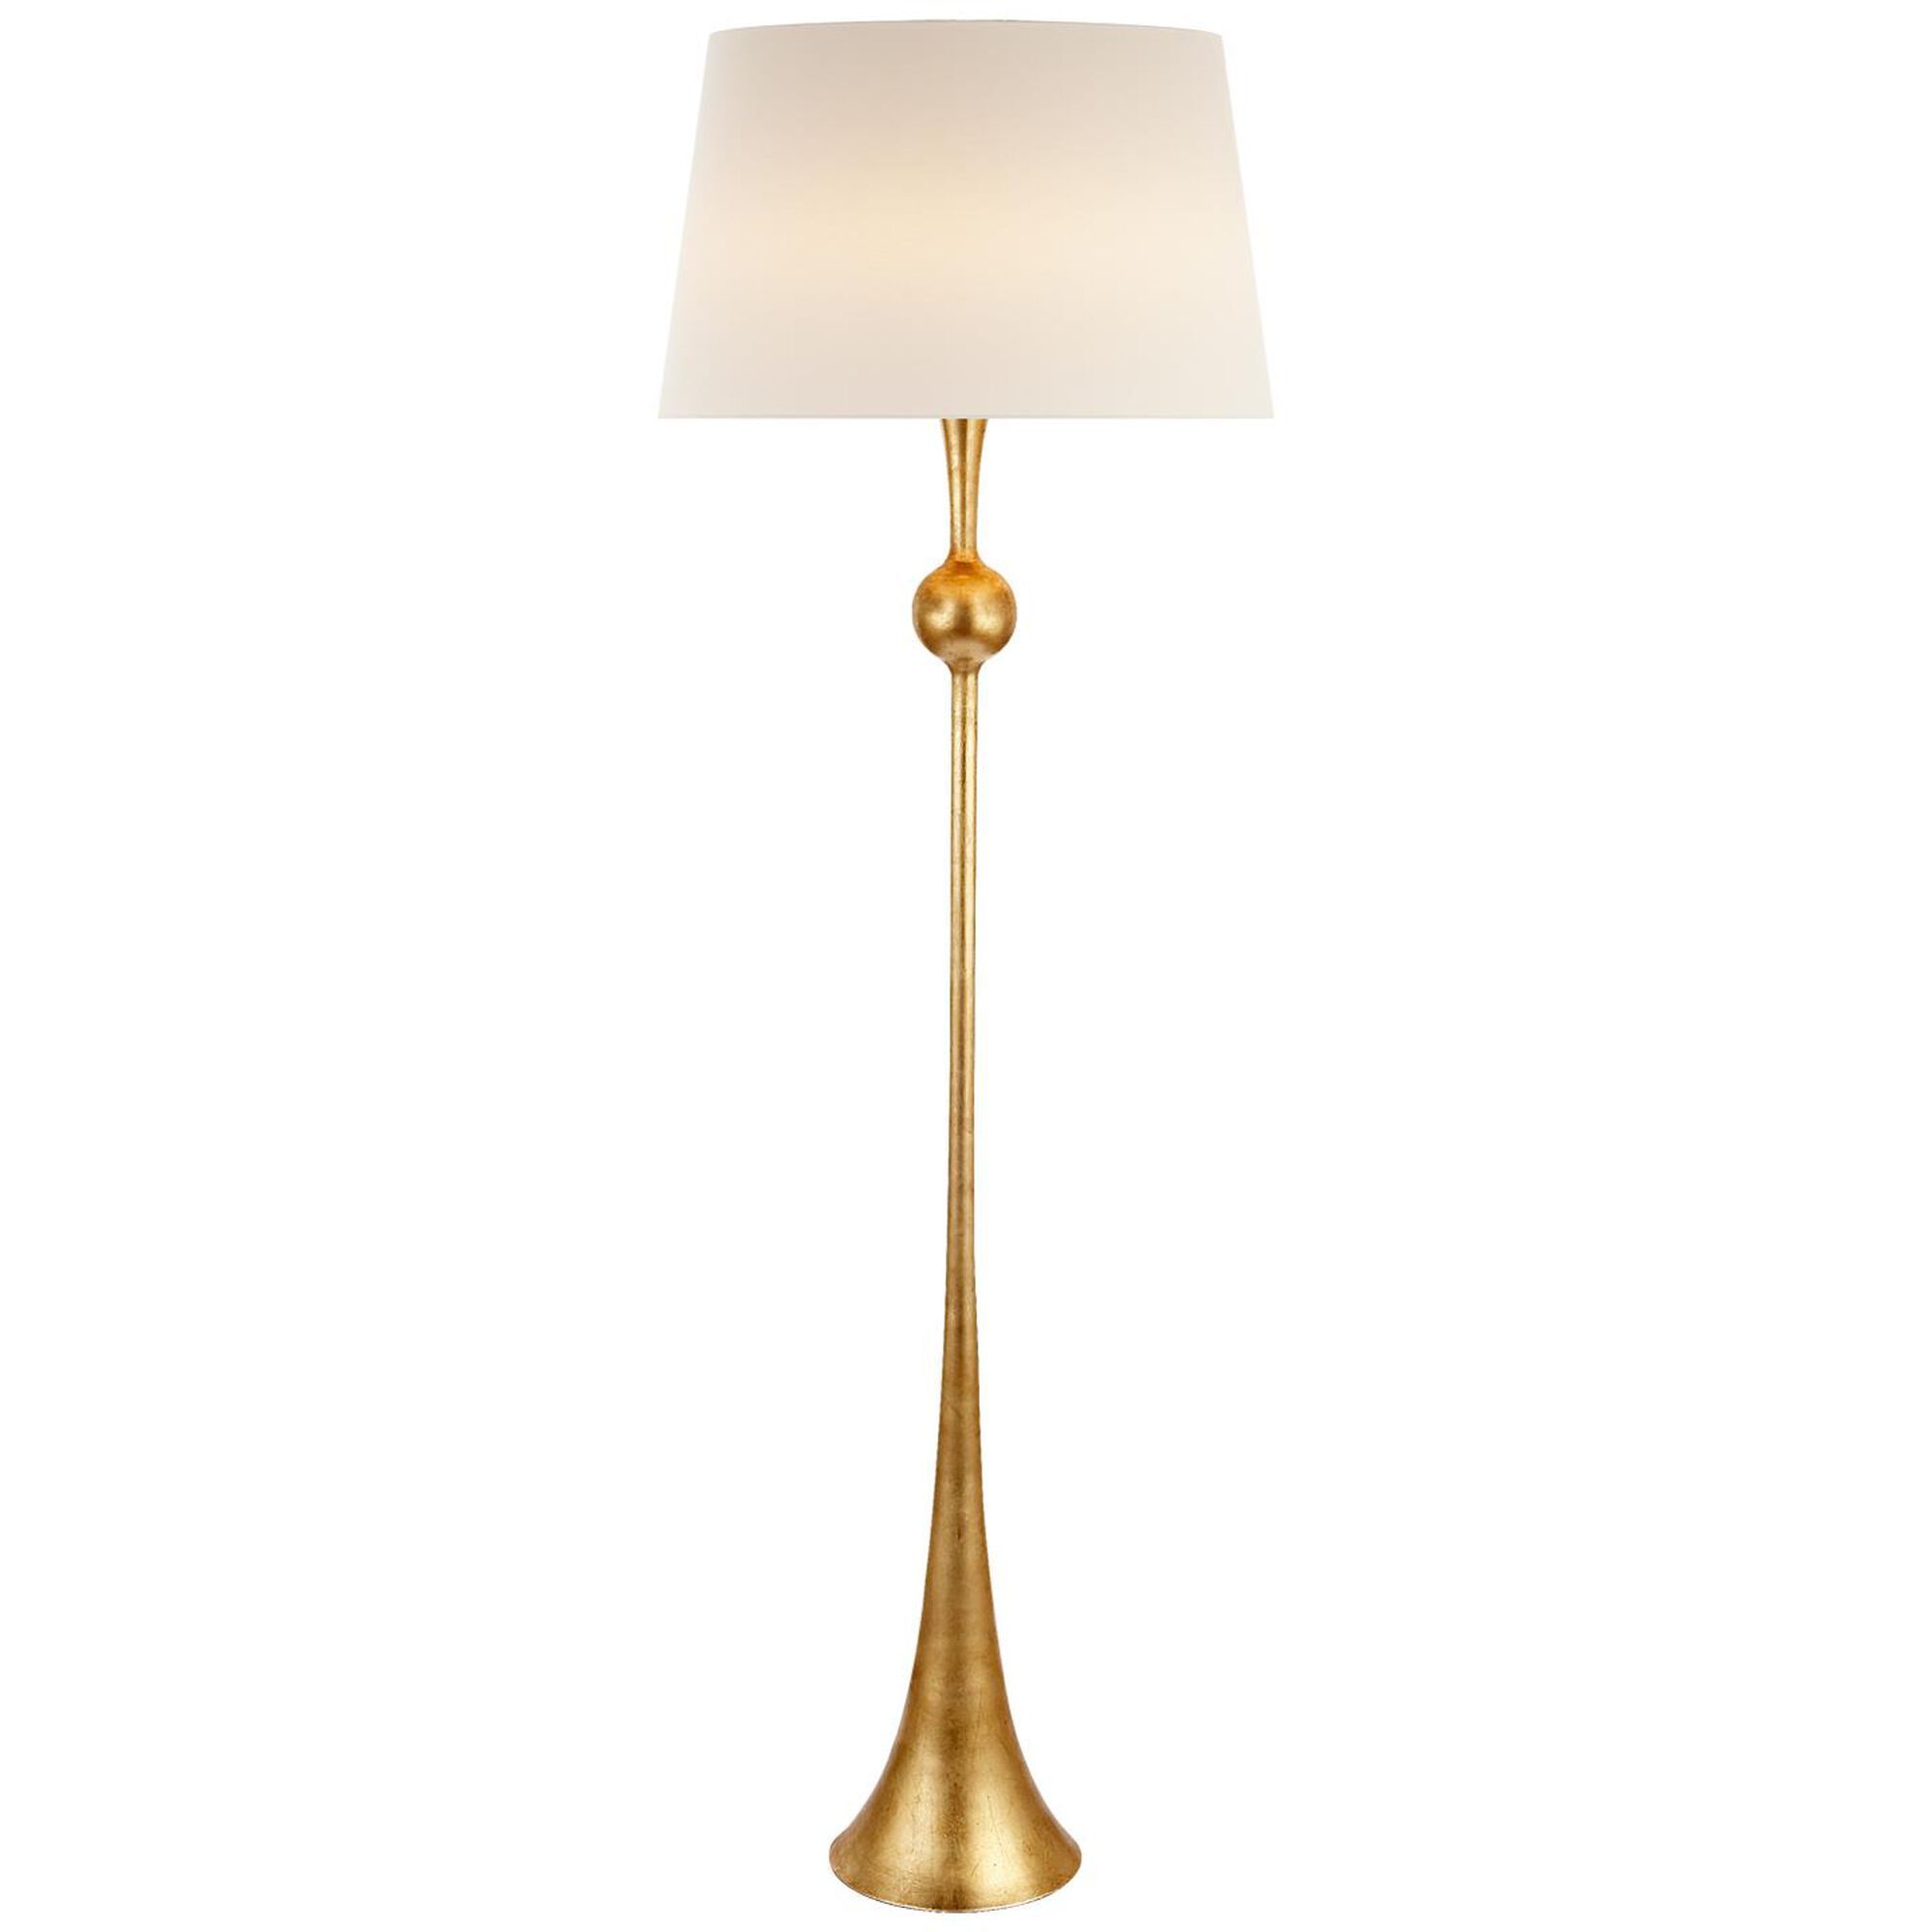 Aerin Dover 63 Inch Floor Lamp by Visual Comfort and Co. | Capitol Lighting 1800lighting.com